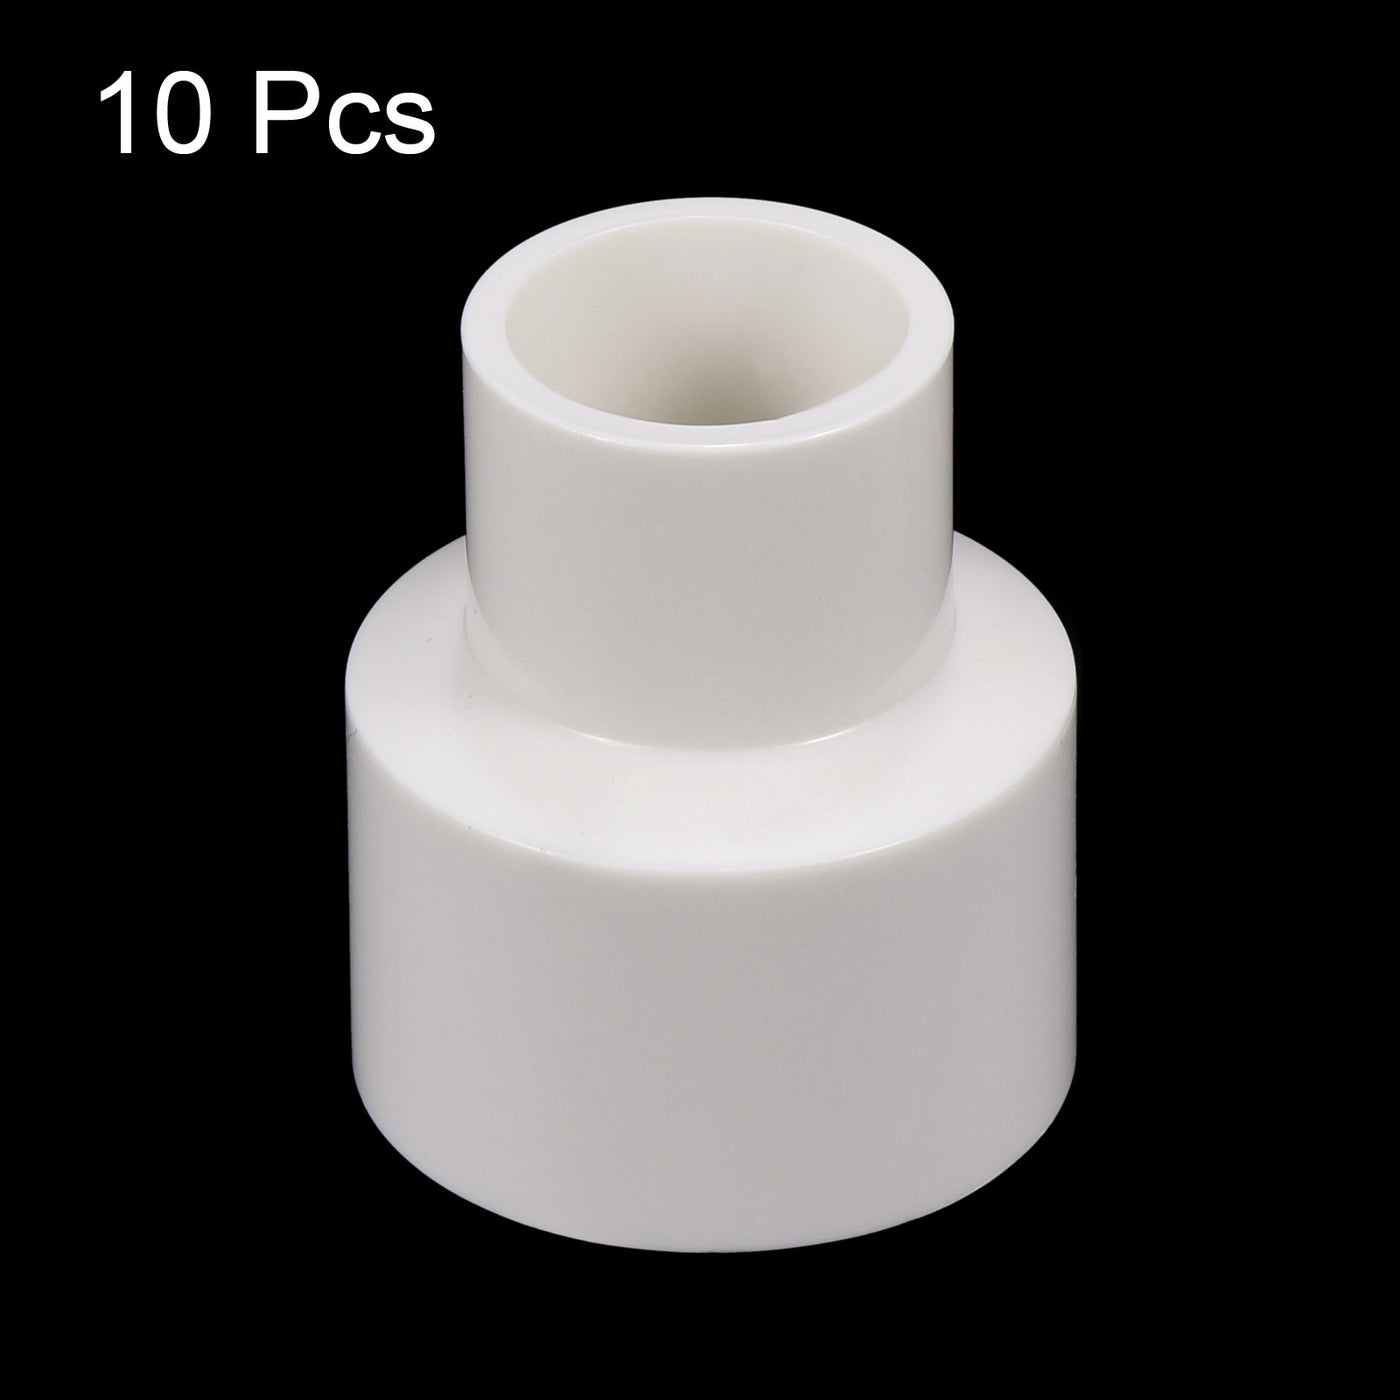 Harfington PVC Reducer Pipe Fitting 32x20mm, 10 Pack Straight Coupling Adapter Connector, White